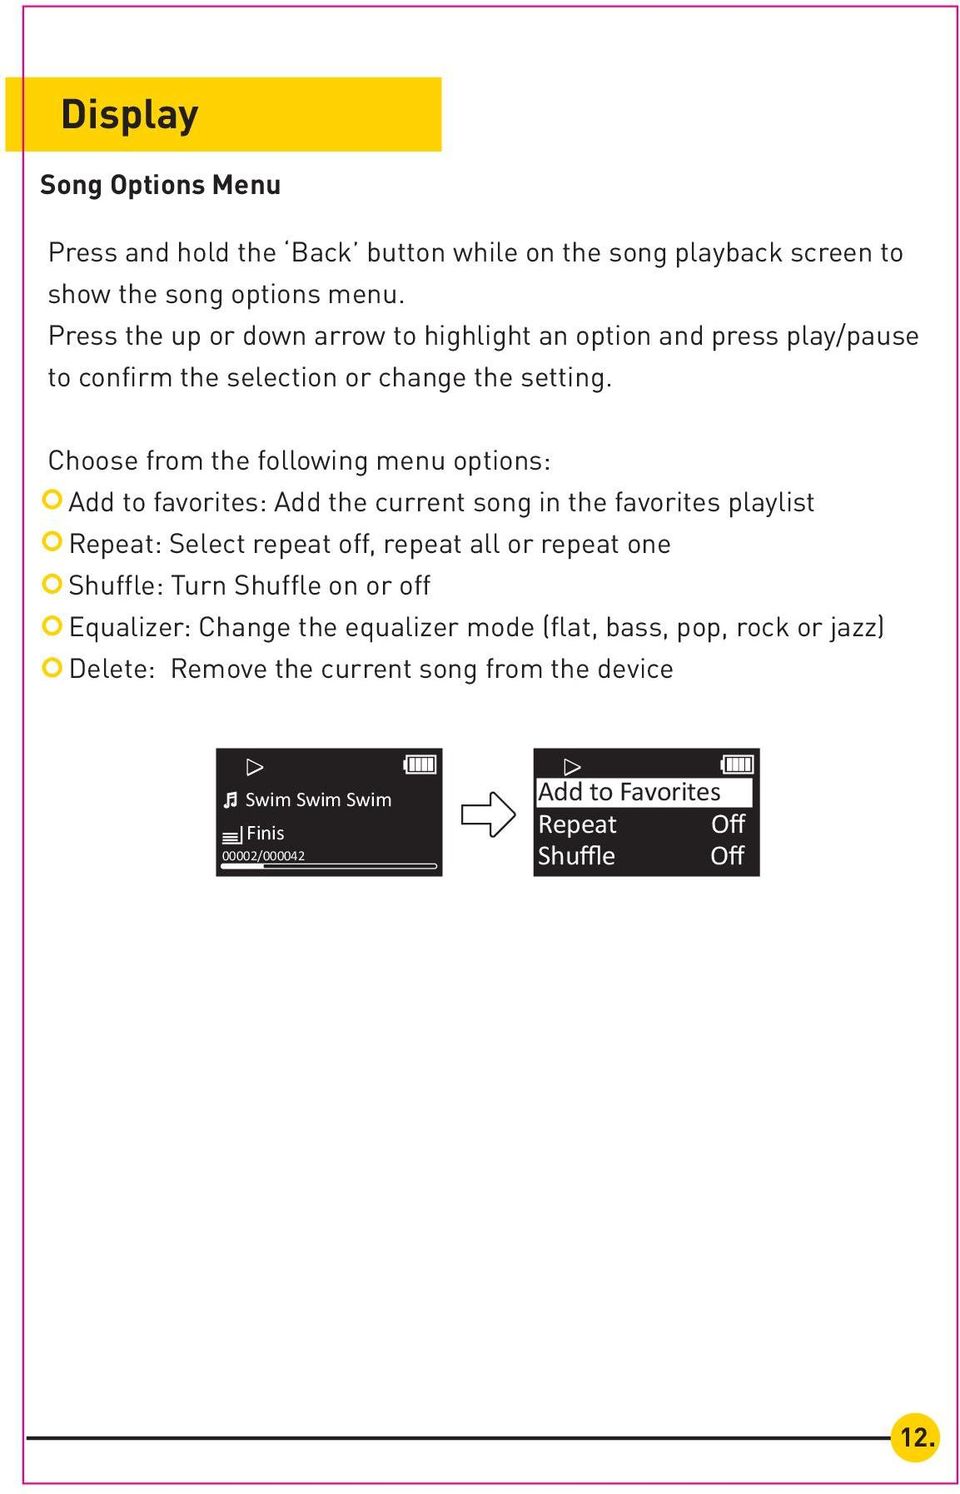 Choose from the following menu options: Add to favorites: Add the current song in the favorites playlist Repeat: Select repeat off, repeat all or repeat one